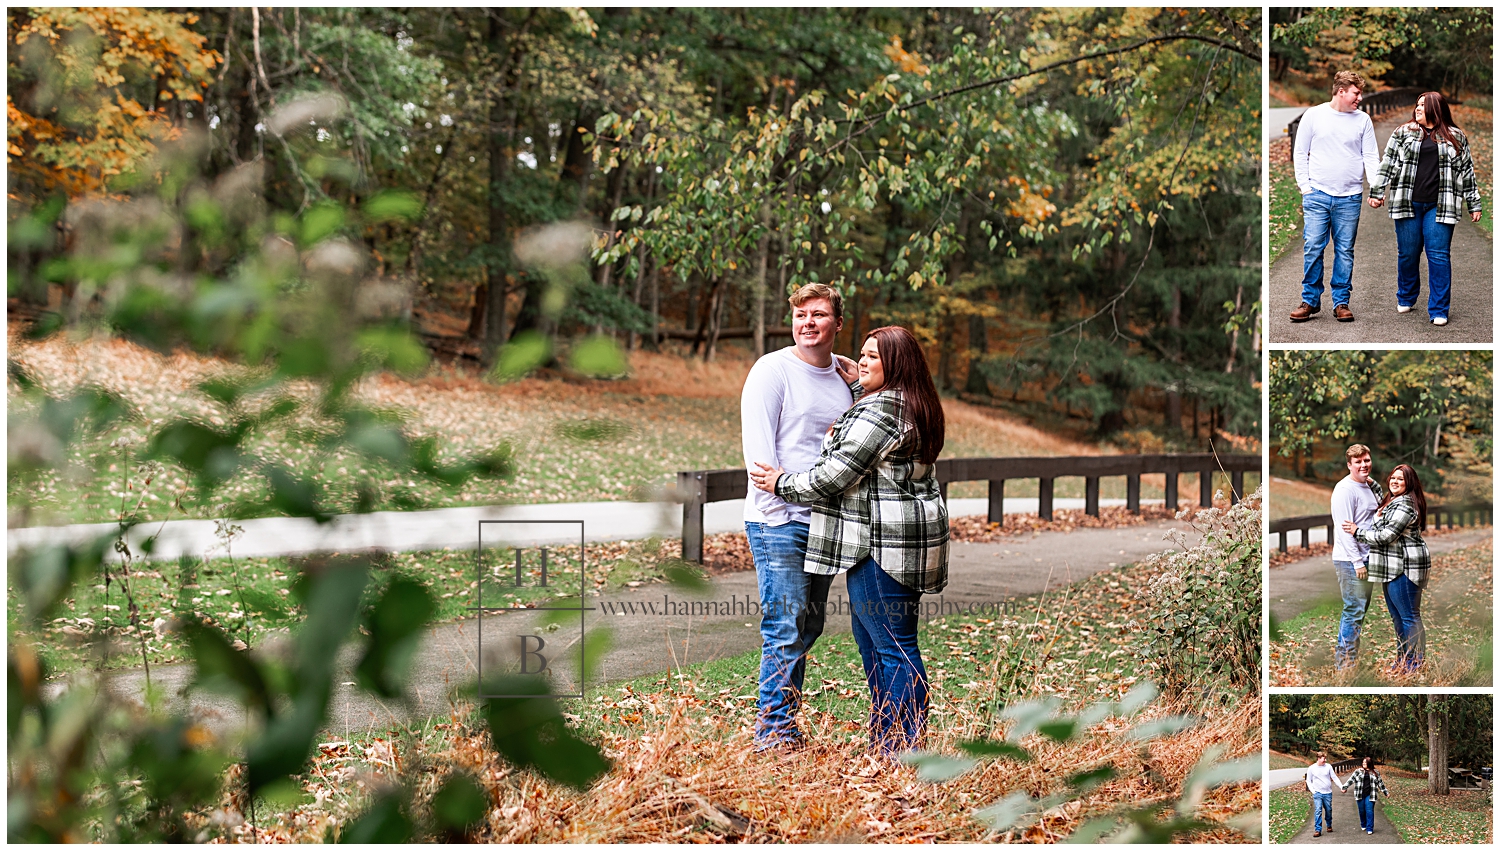 Look poses for engagement photos and gazes away in the fall forest.